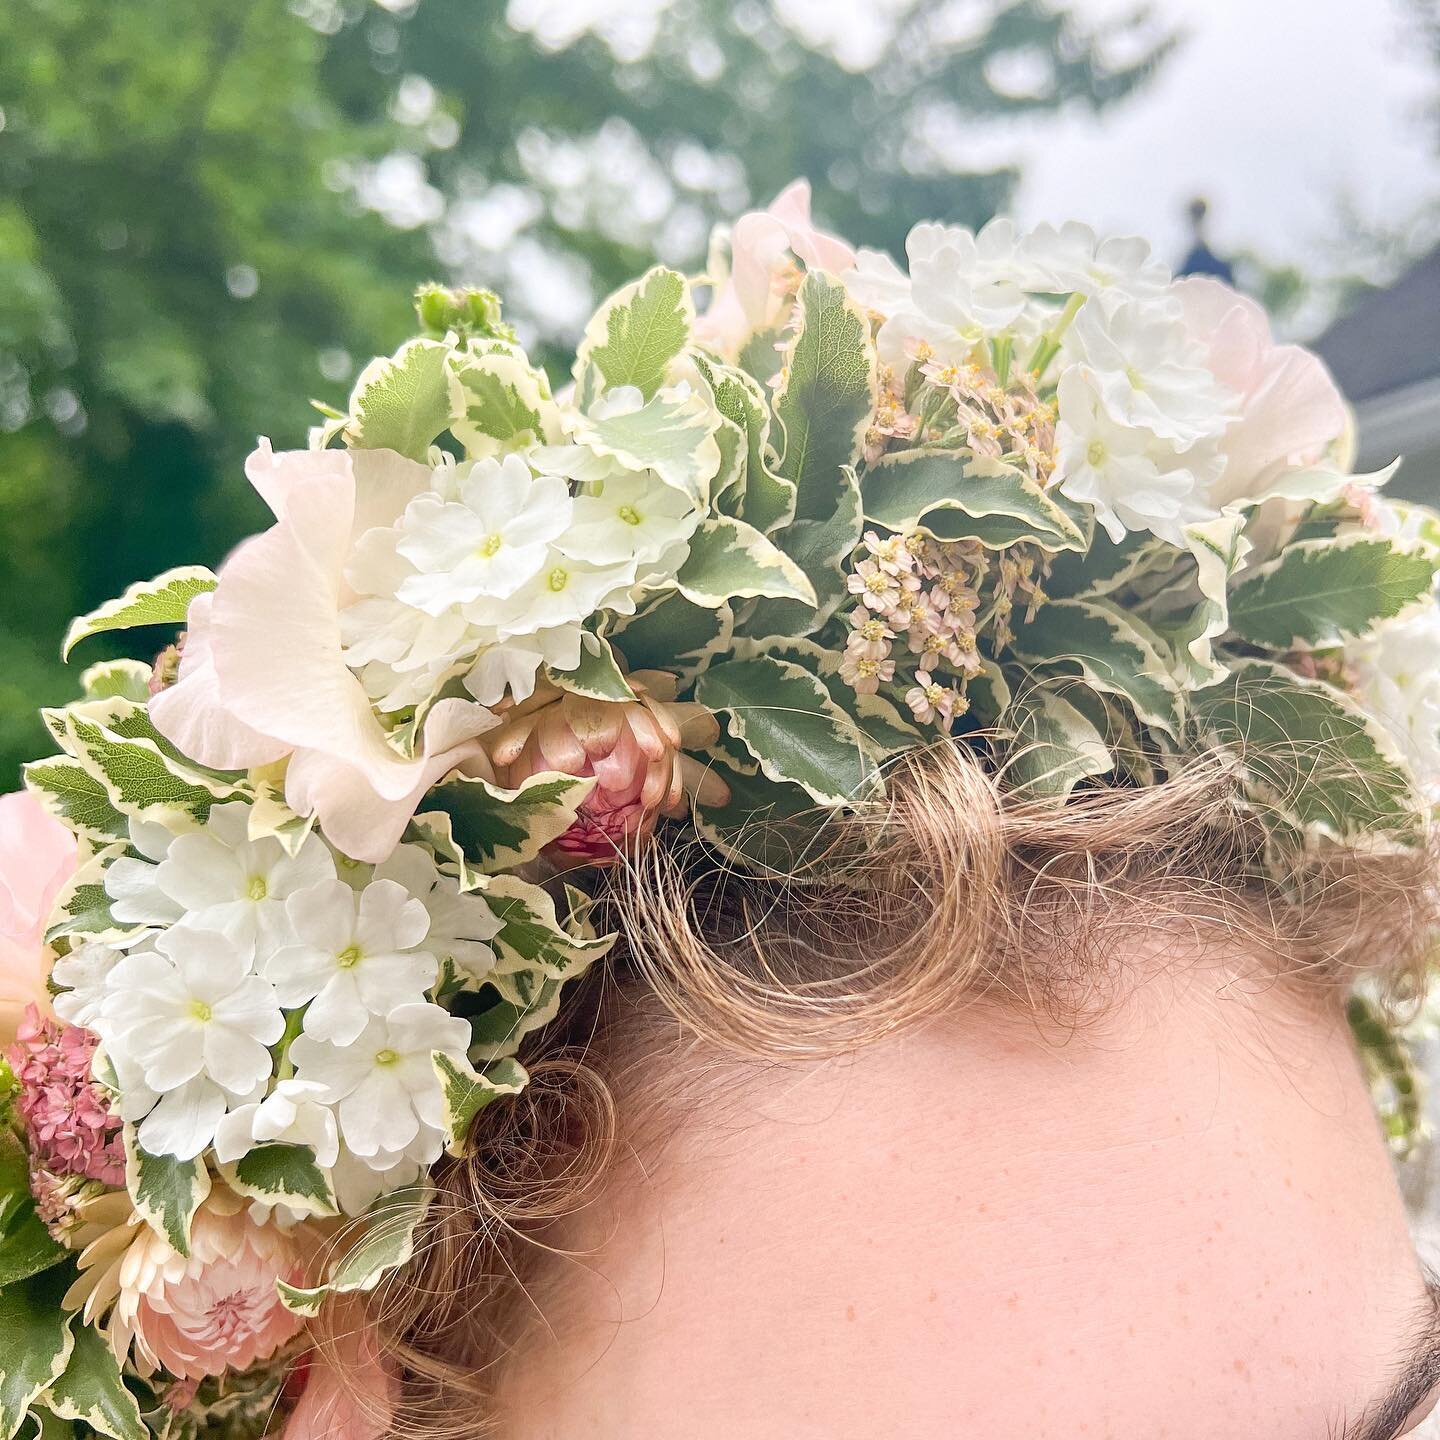 Midsummer party crown with the palest of peach sweet peas, summer berries yarrow, strawflowers, and white verbena. And a sweet curl from my favorite 12 yr old head model 🤍

#bloomcraft #flowercrown #floralcrown #midsummer #midsummer #summerflowers #